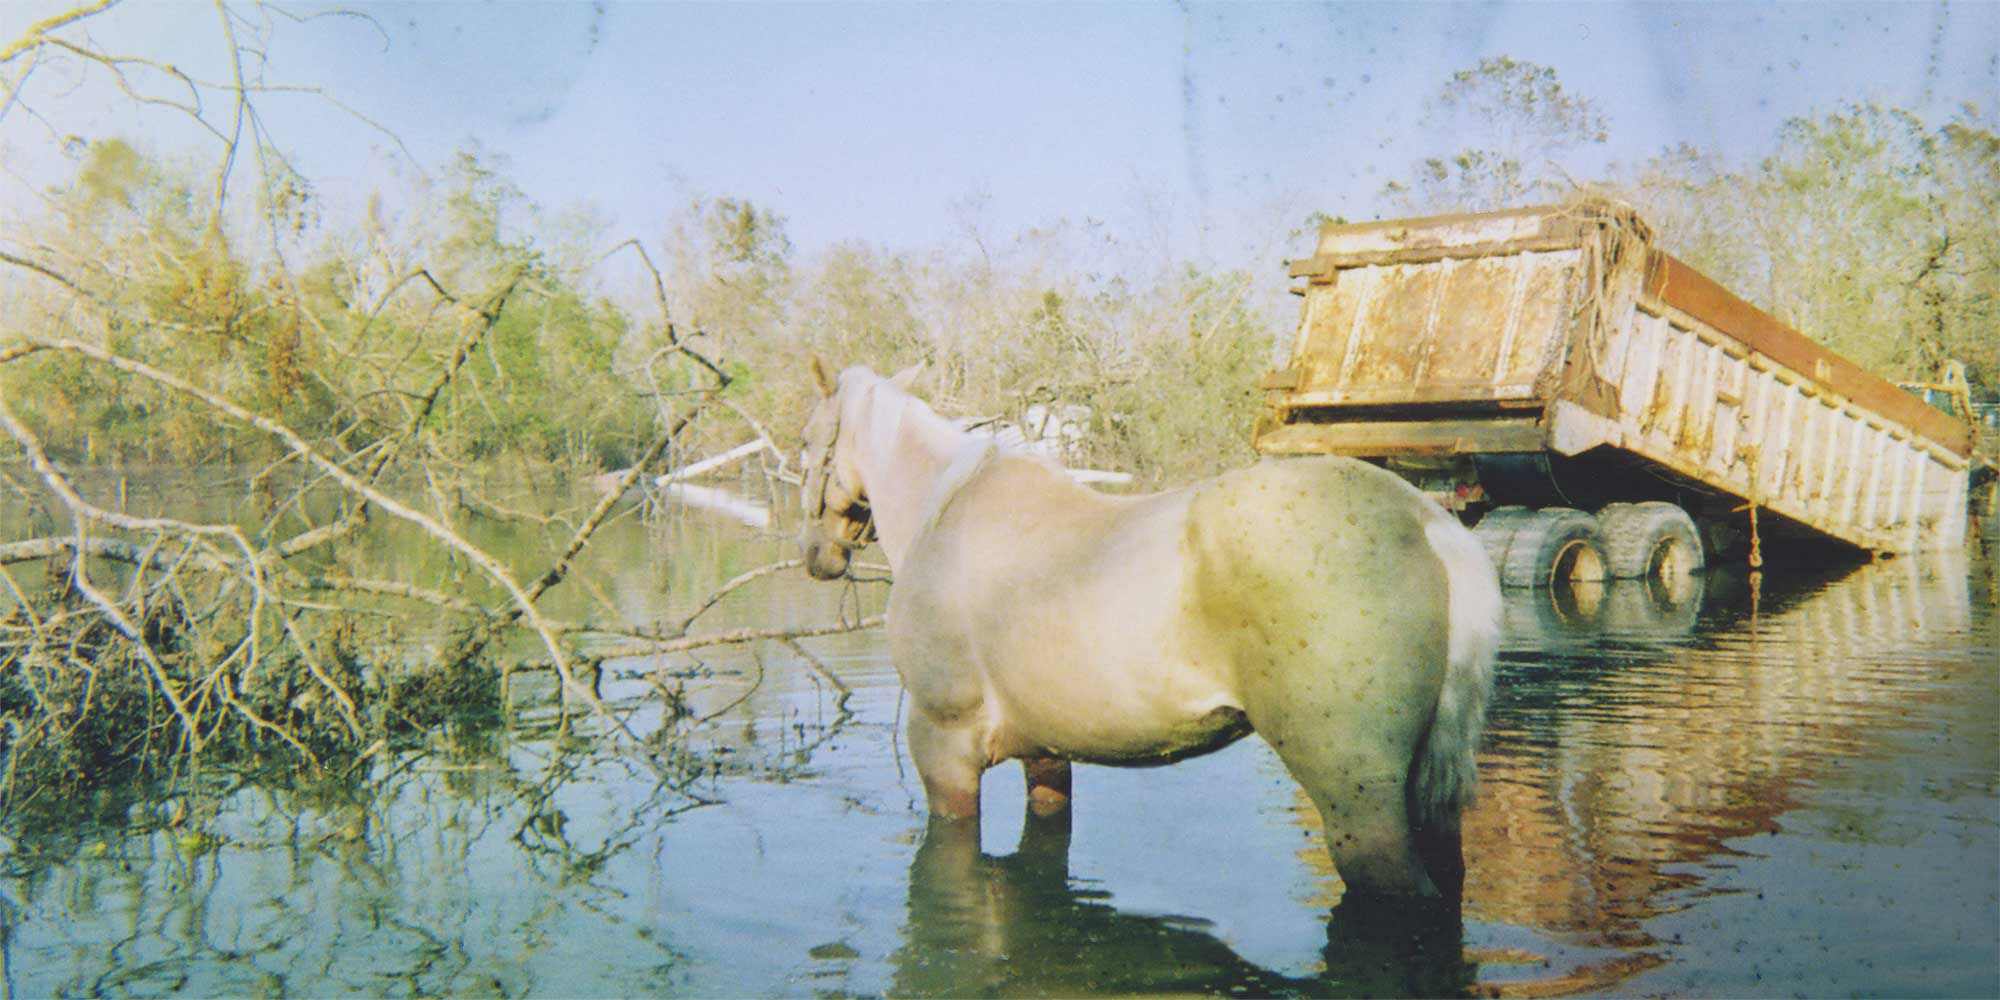 A Horse in flood wreckage.